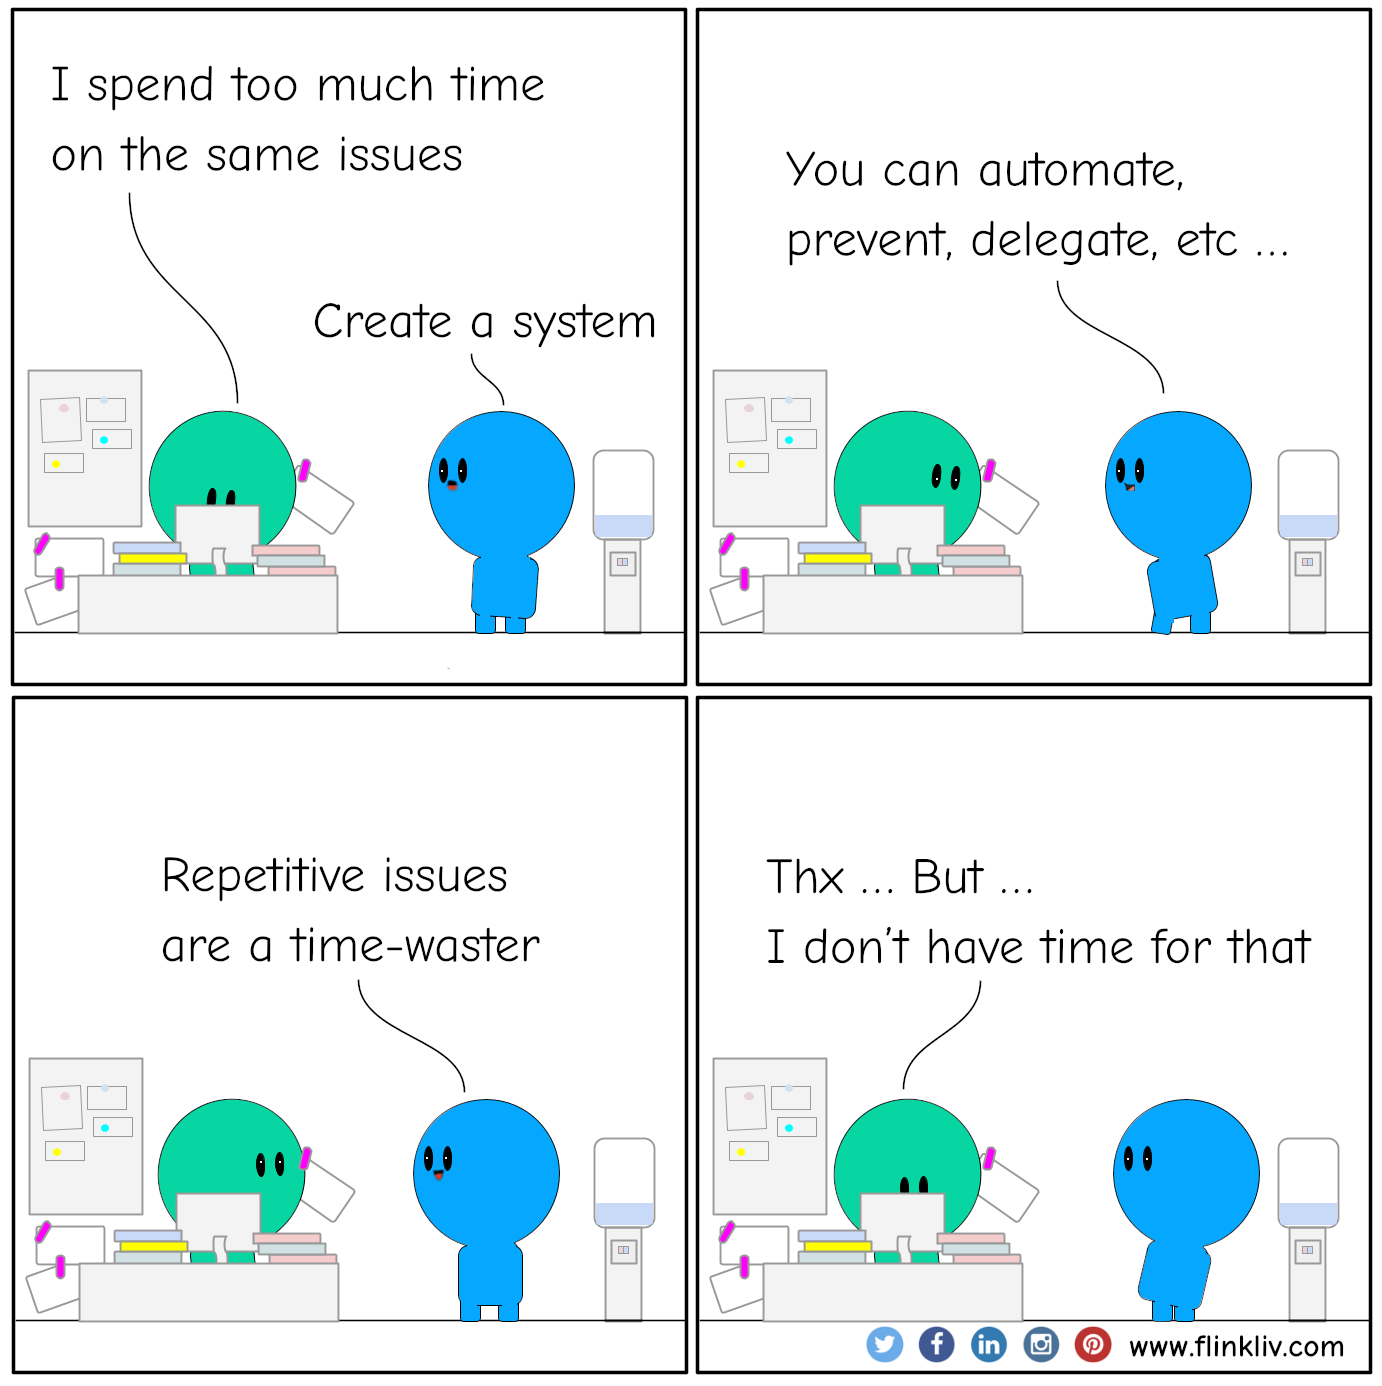 Conversation between A and B about addressing repetitive issues.
    A: I spend too much time on the same issues.
    B: Create a system.
    B: You can automate, prevent, delegate, etc.
    B: Repetitive issues are a time-waster.
    A: Thx, but I don't have time for that.
    By flinkliv.com